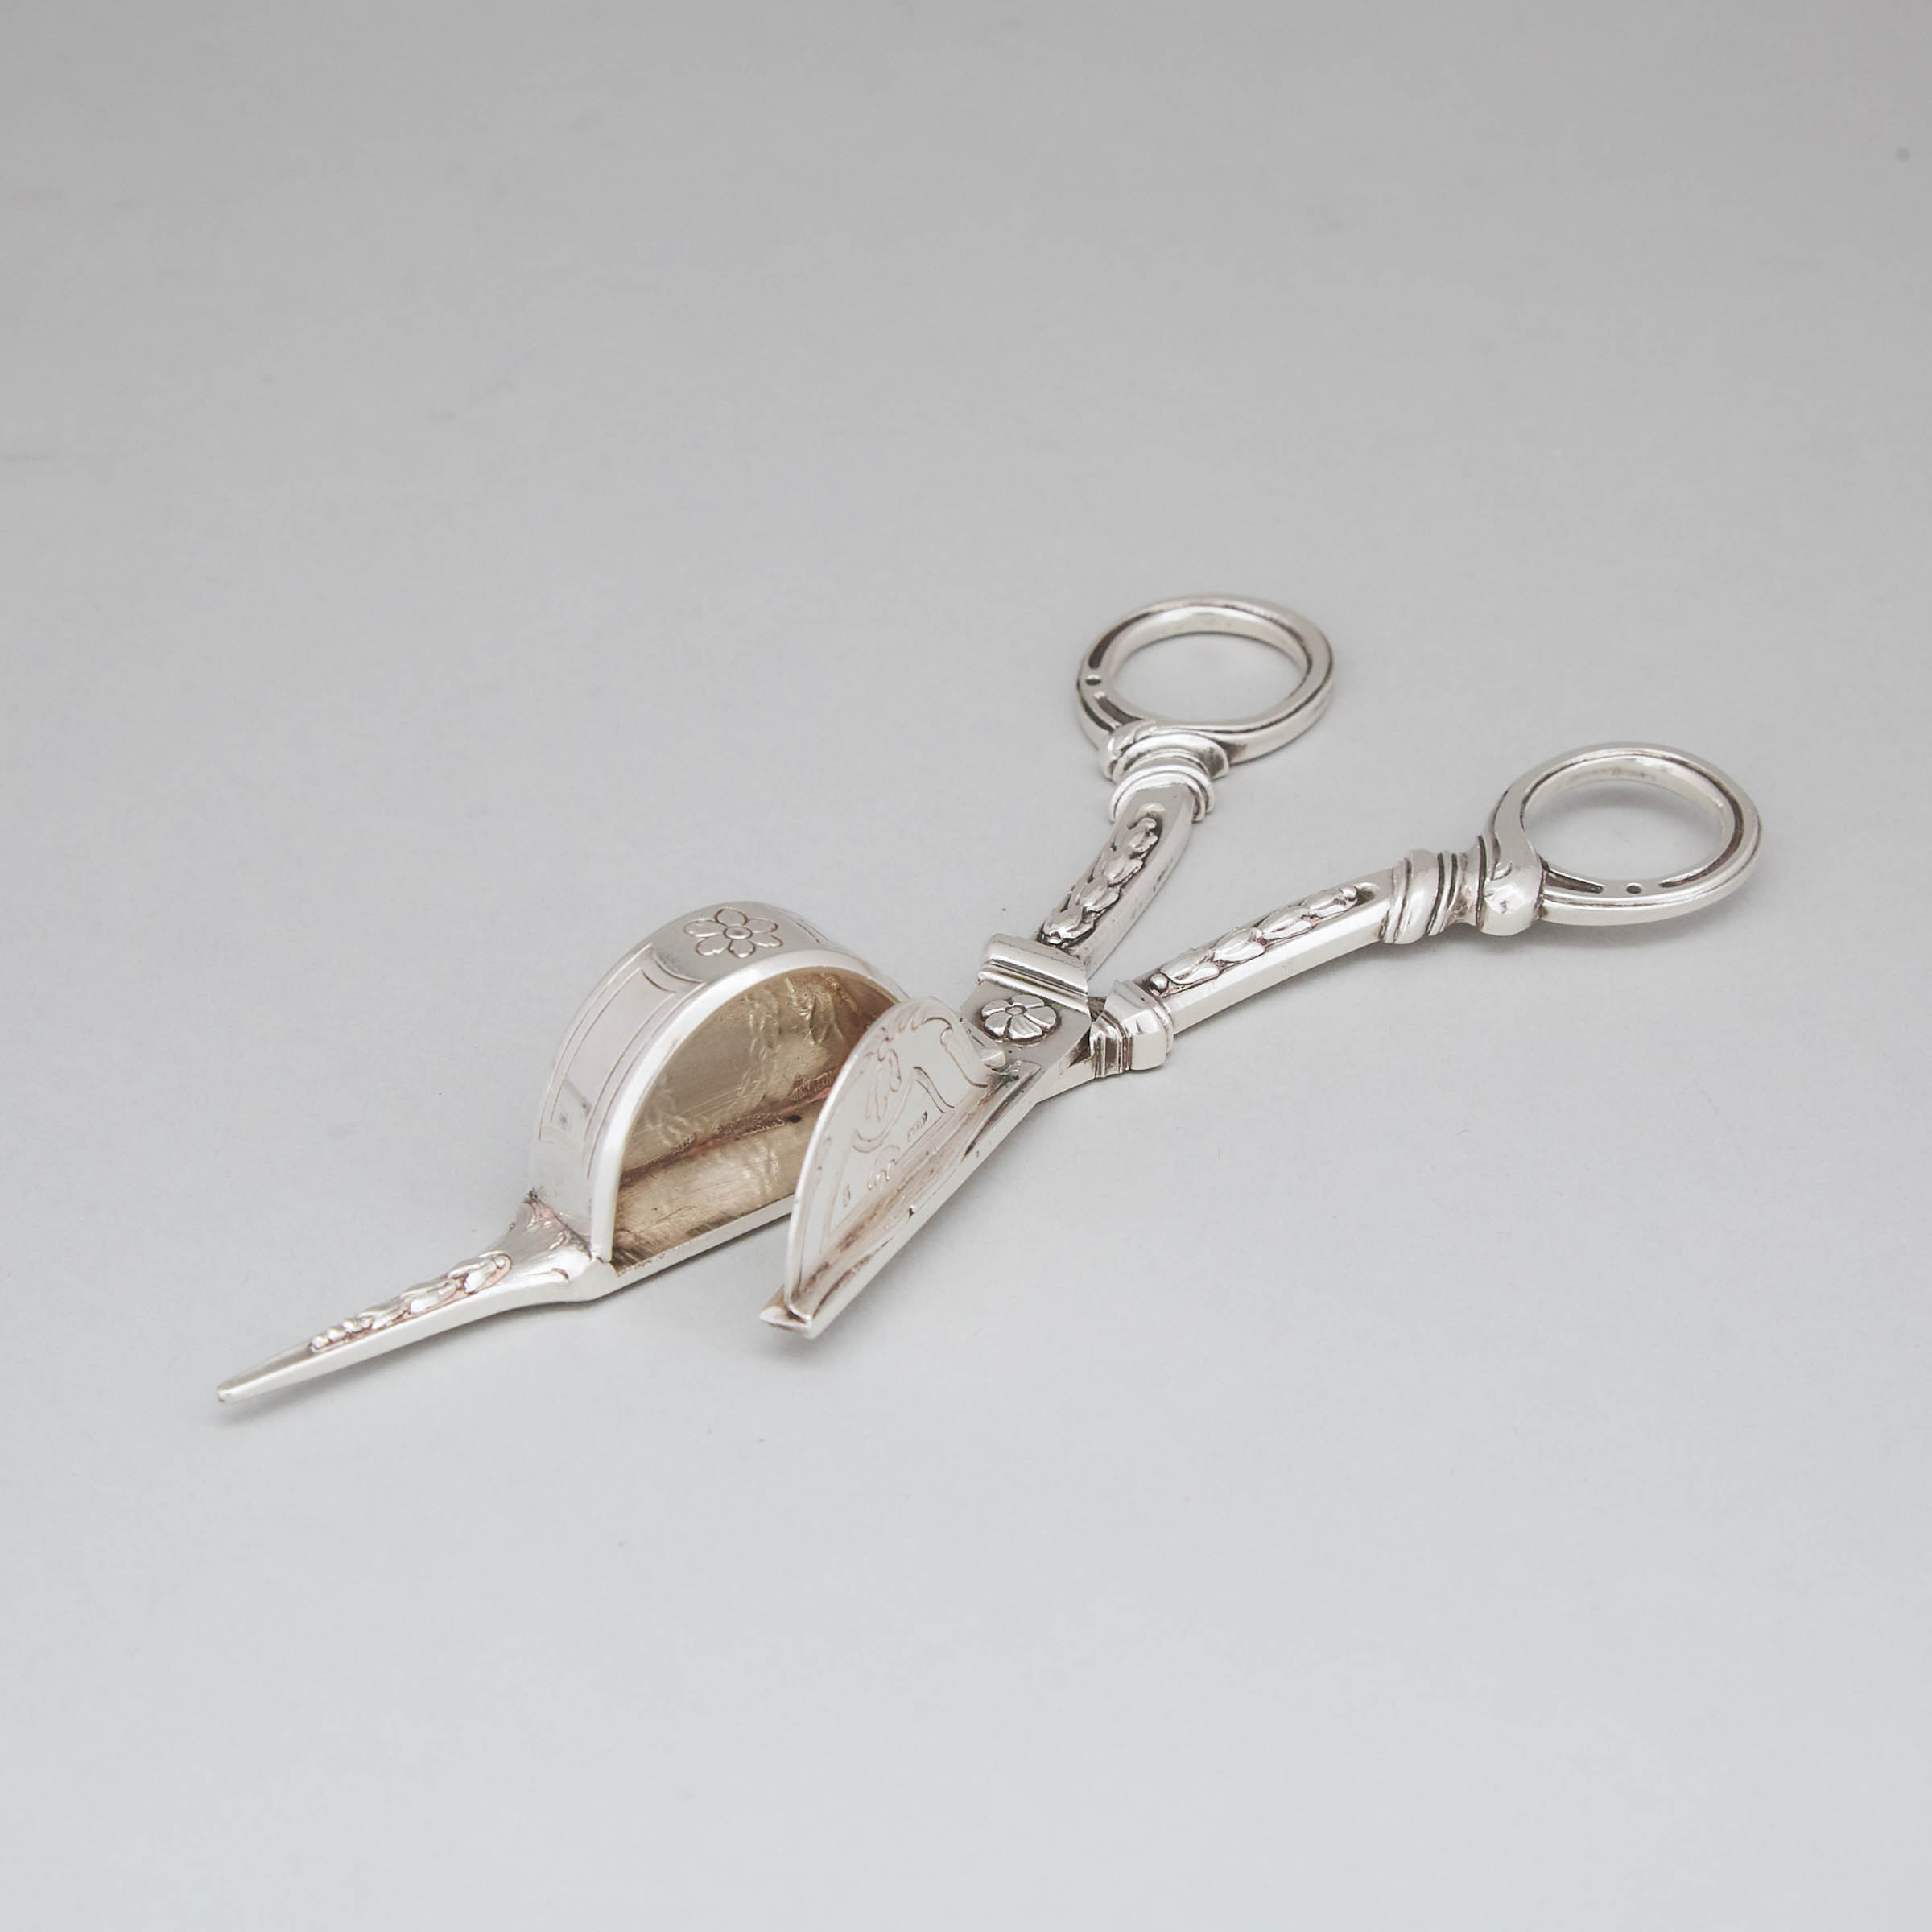 Portuguese Silver Snuffers, possibly Colonial, late 18th/early 19th century